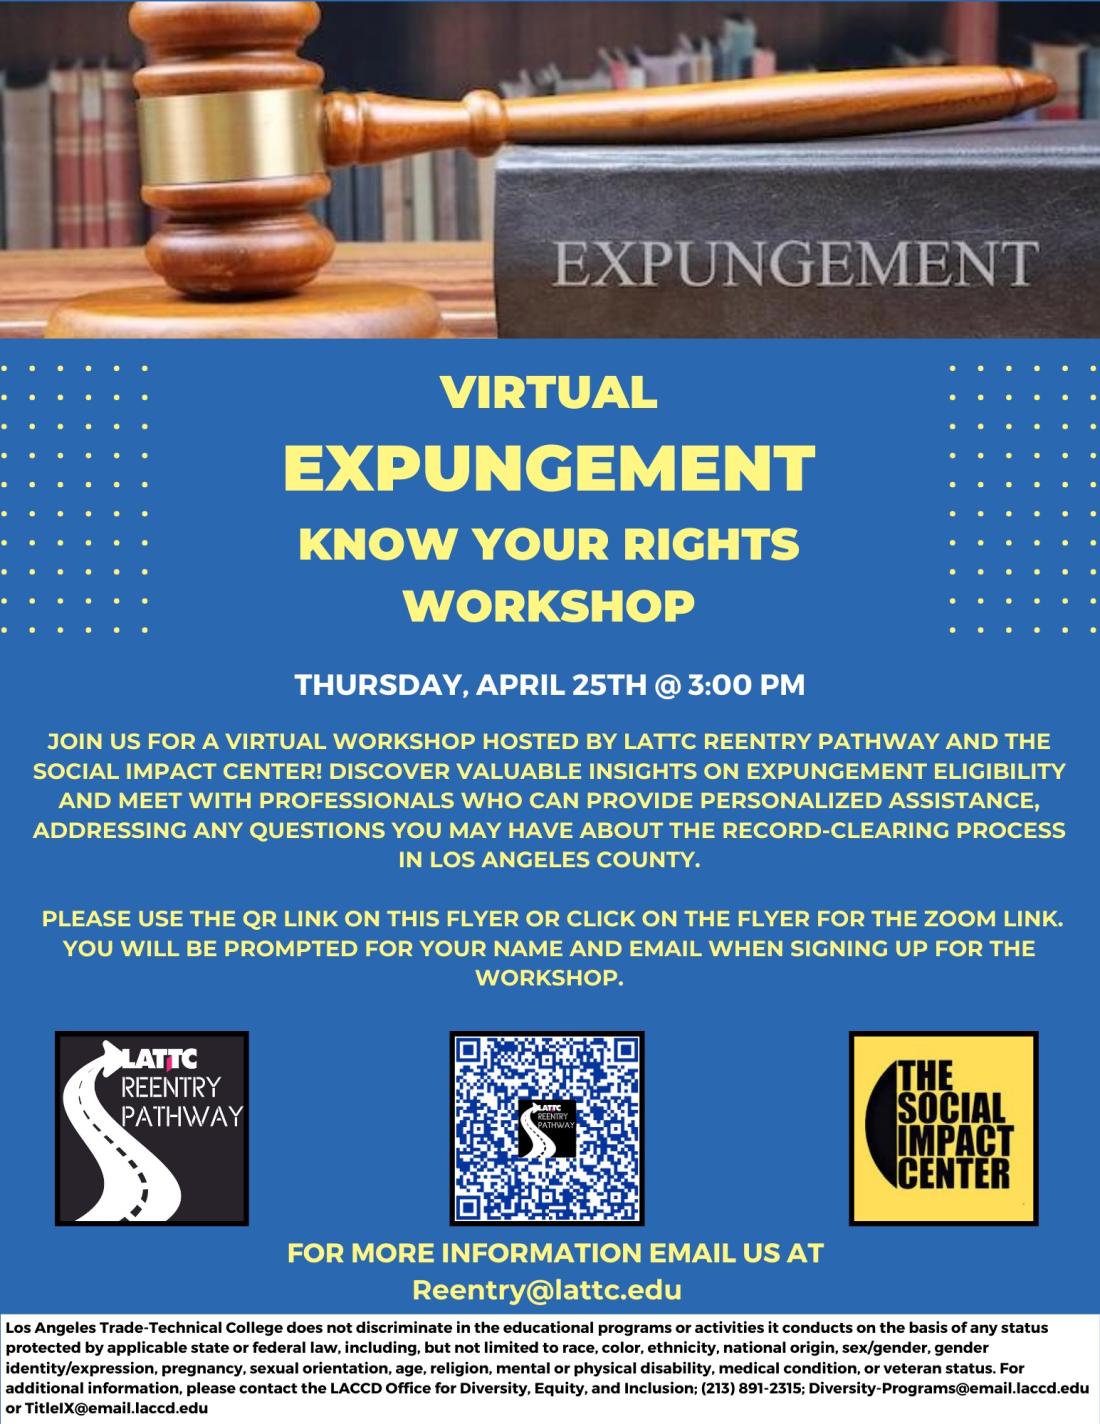 Virtual expungement flyer